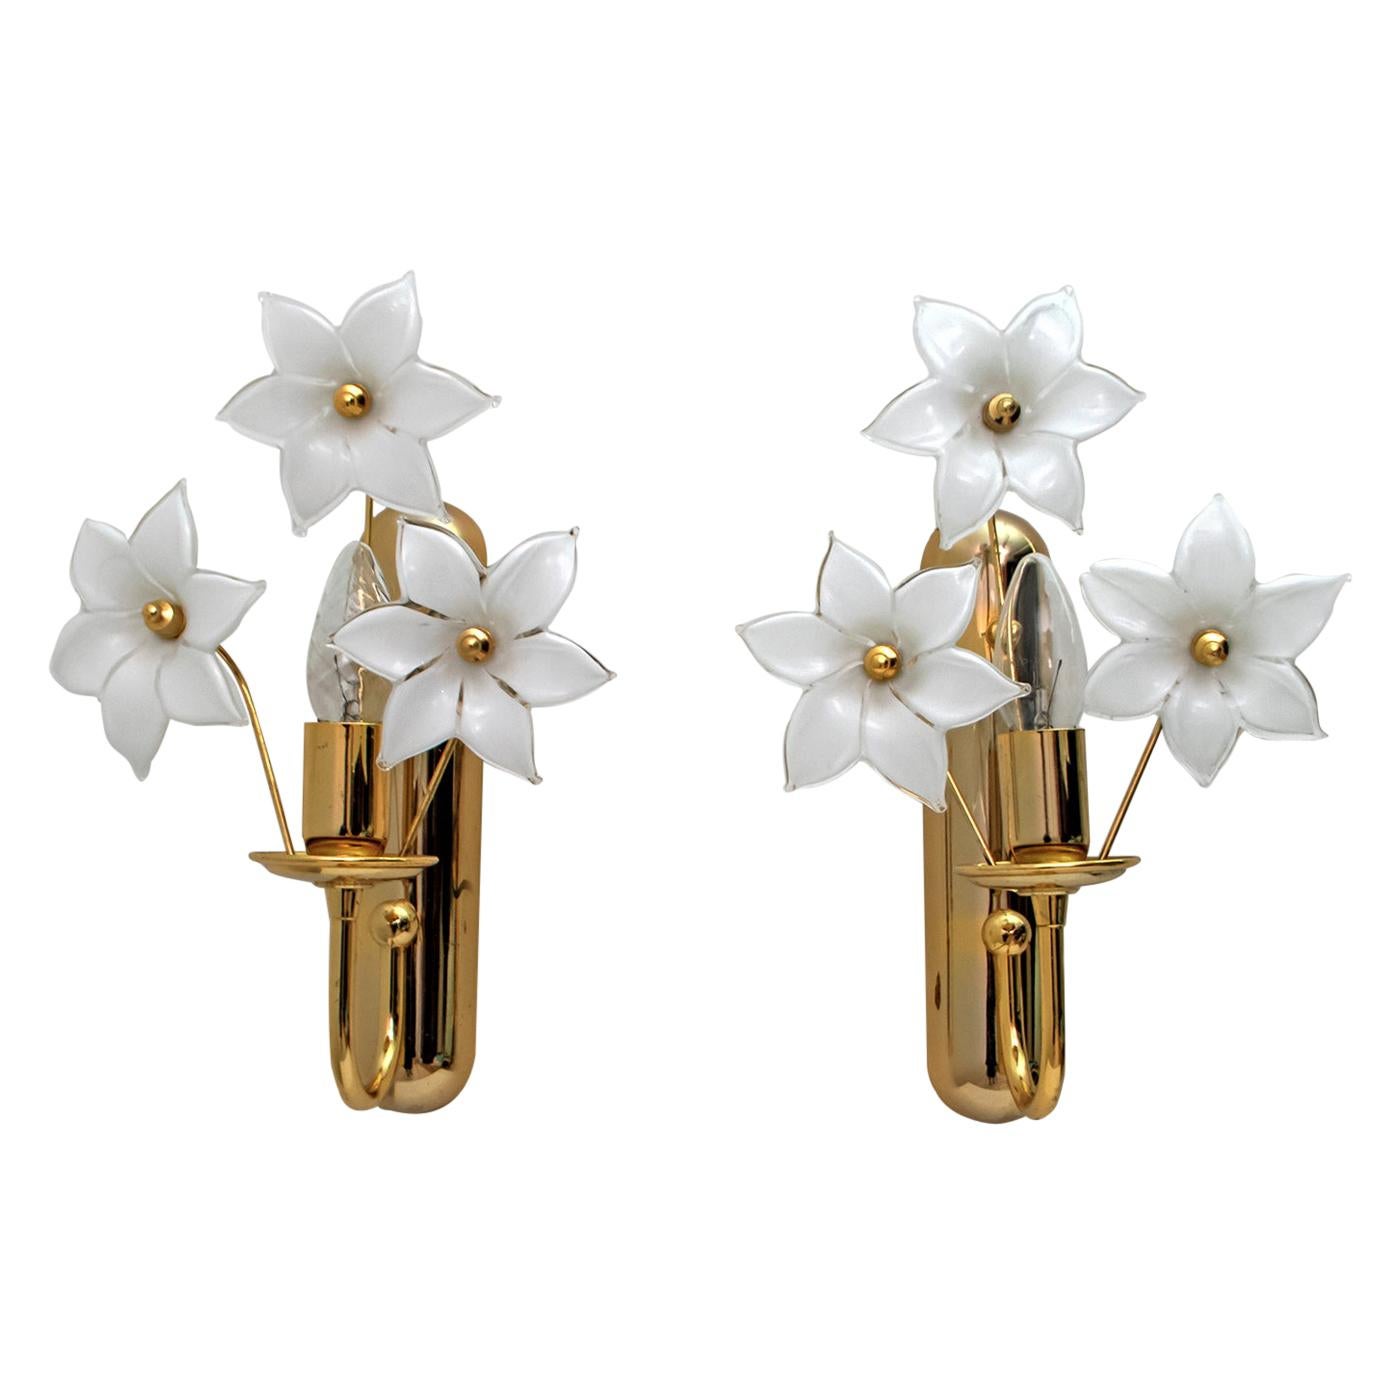 Pair of Mid-Century Modern Italian Brass and Murano Glass Flowers Sconces, 1975s